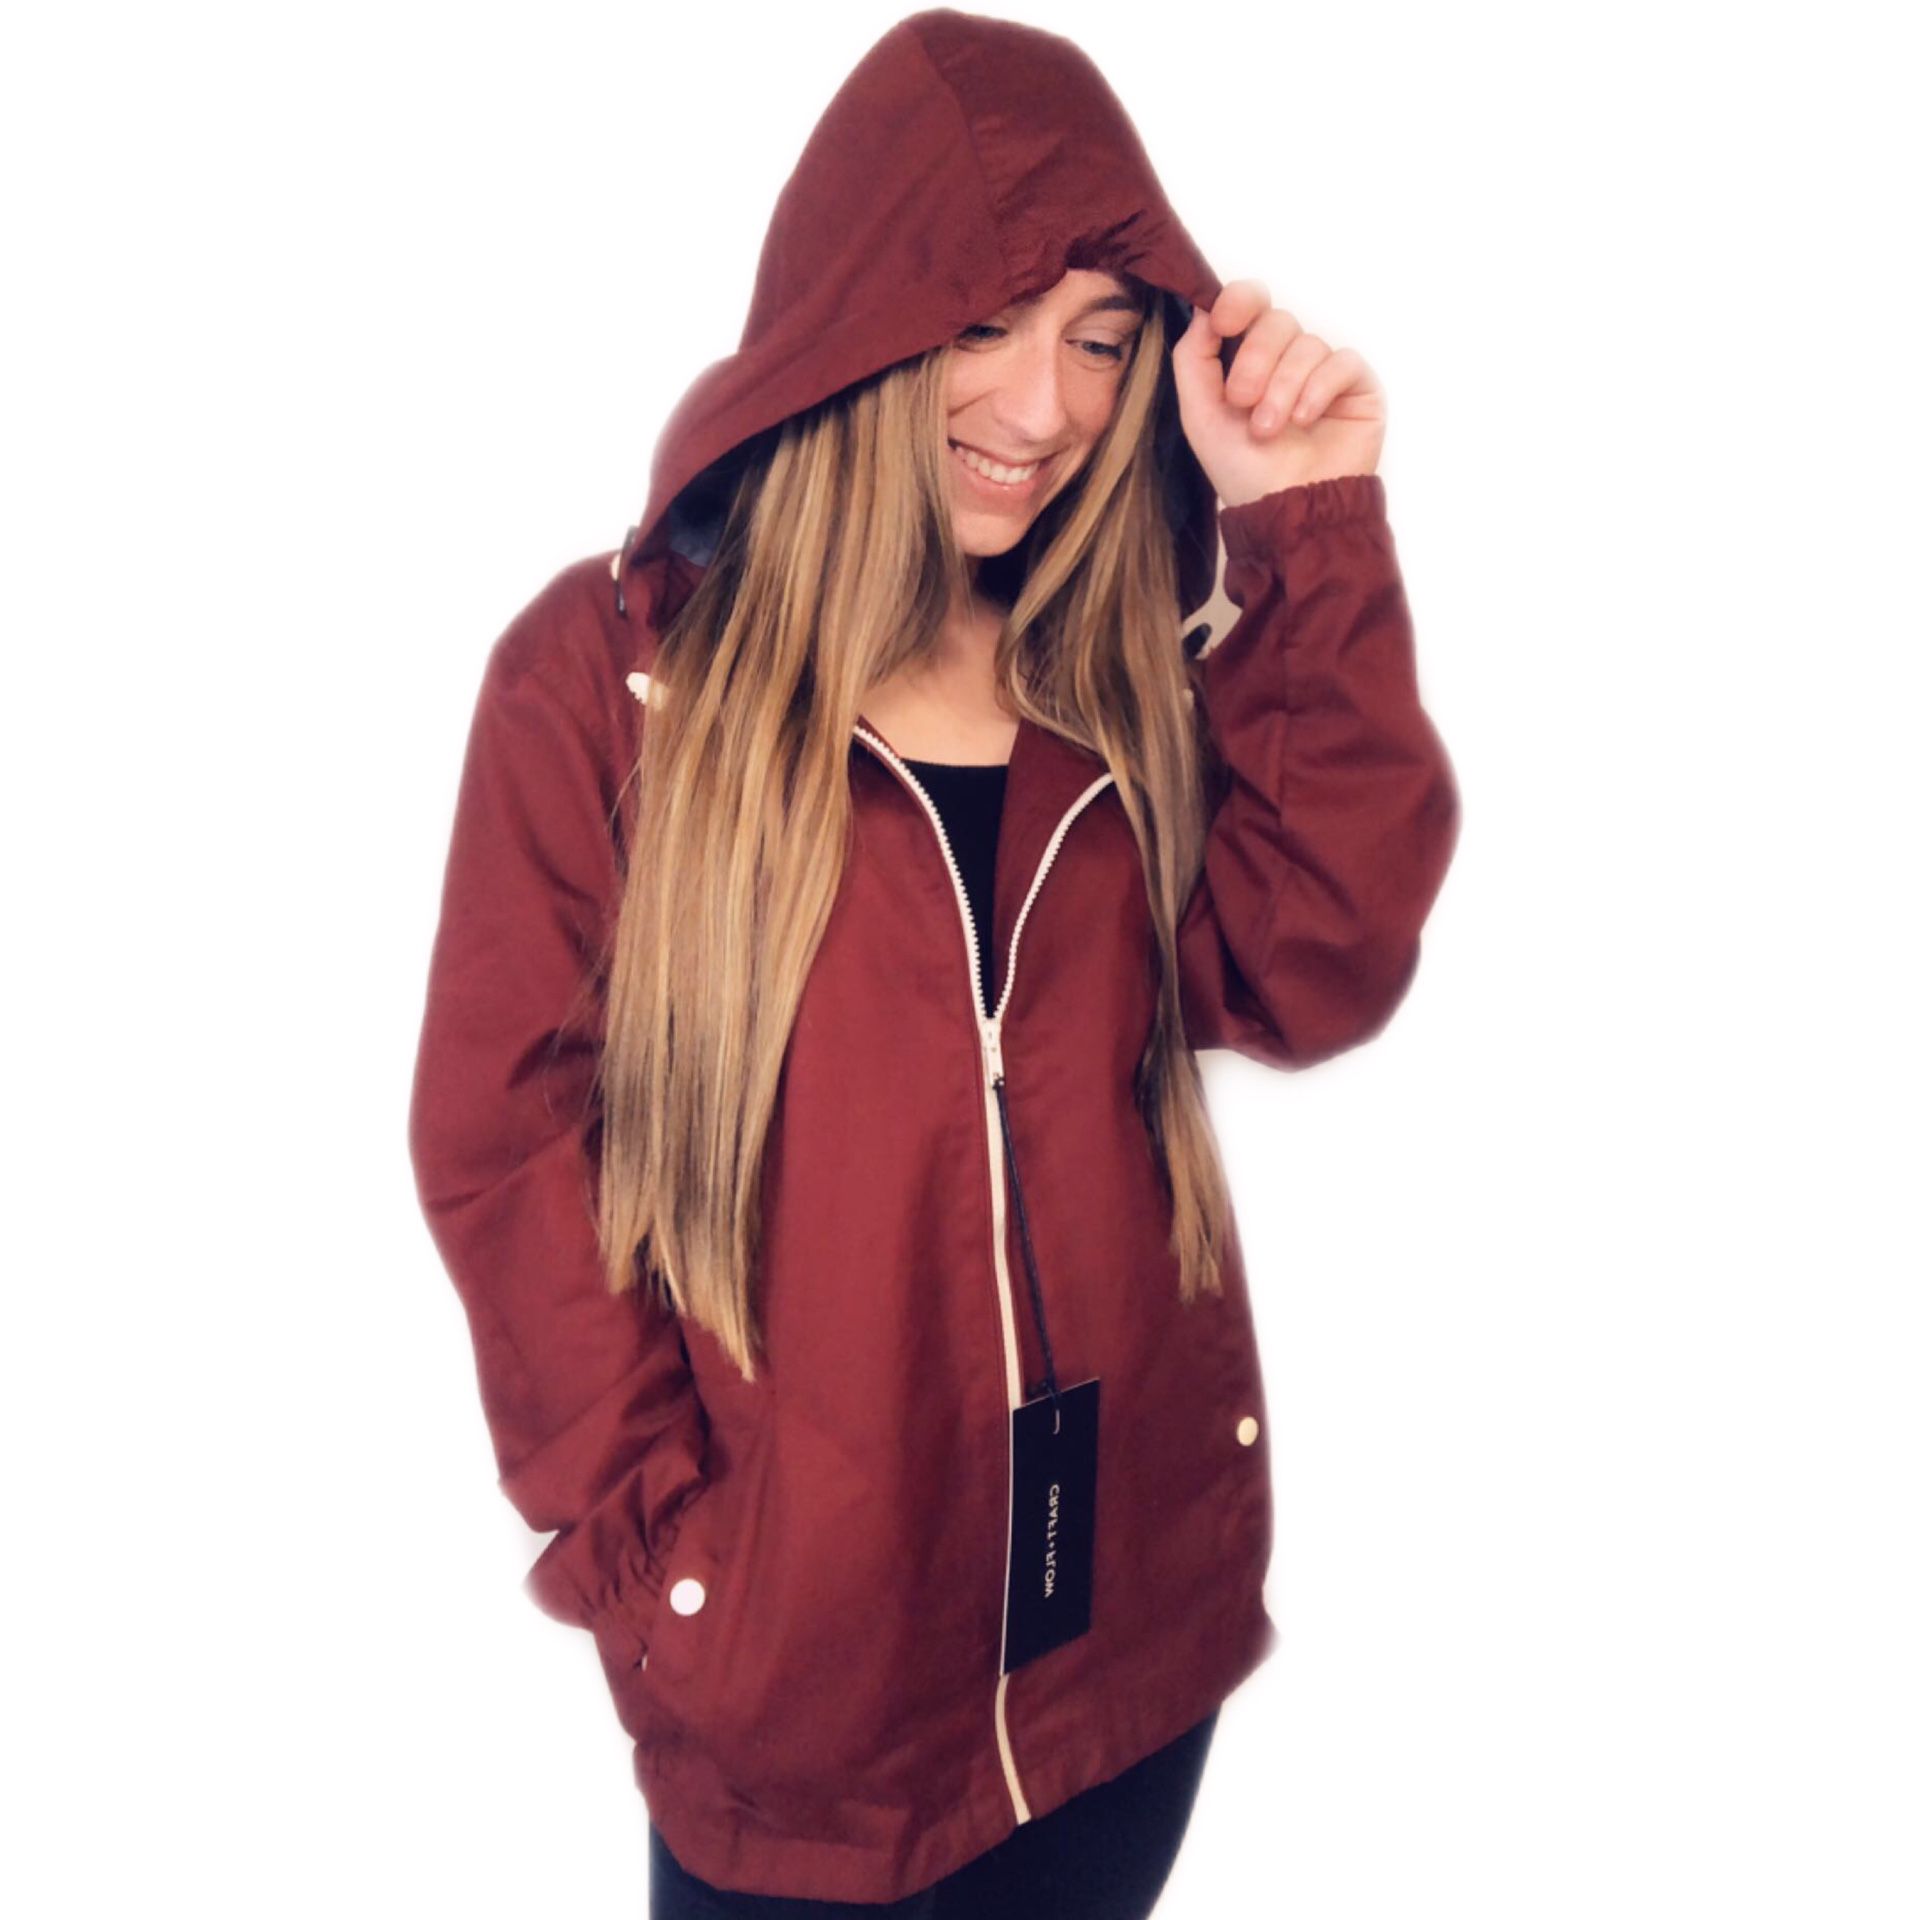 NWT CRAFT + FLOW cranberry red full zip up hooded jacket with pockets medium unisex